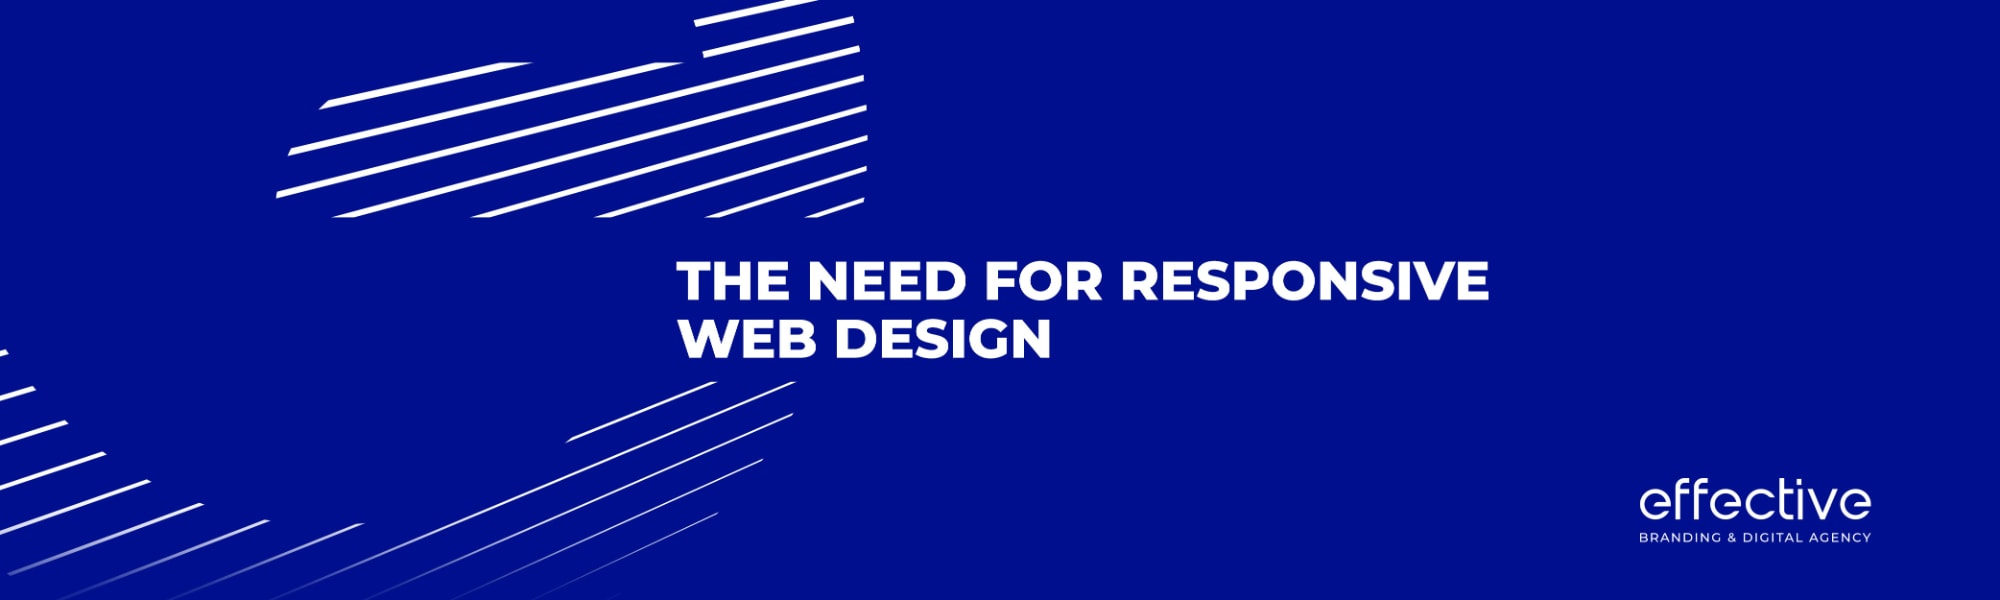 The Need for Responsive Web Design